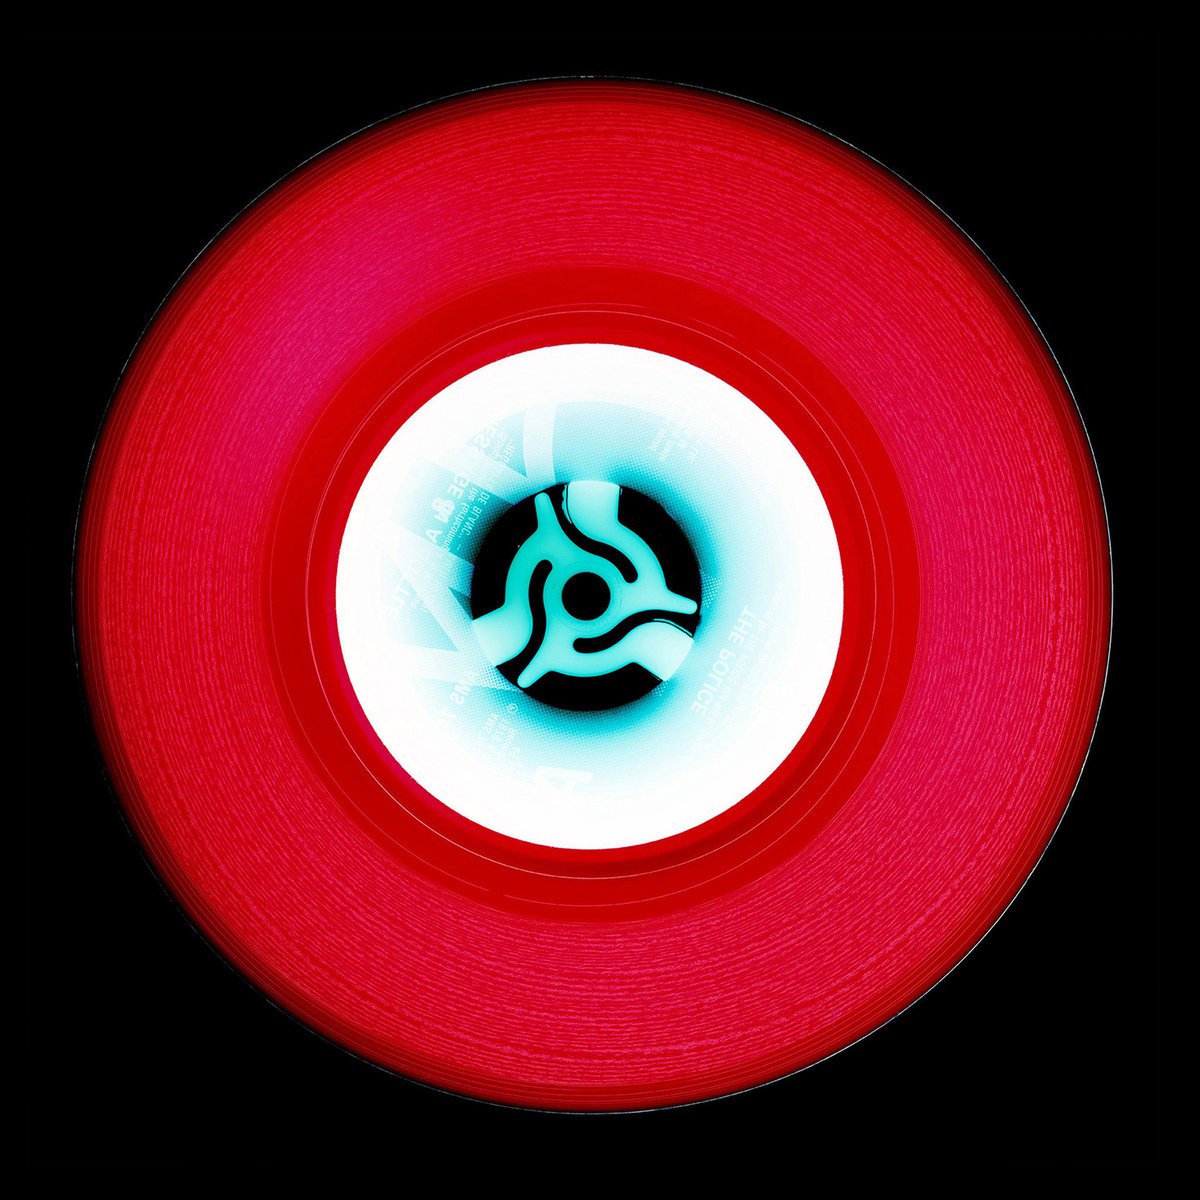 Heidler & Heeps Vinyl Collection ’A’ (Cherry Red) by Richard Heeps